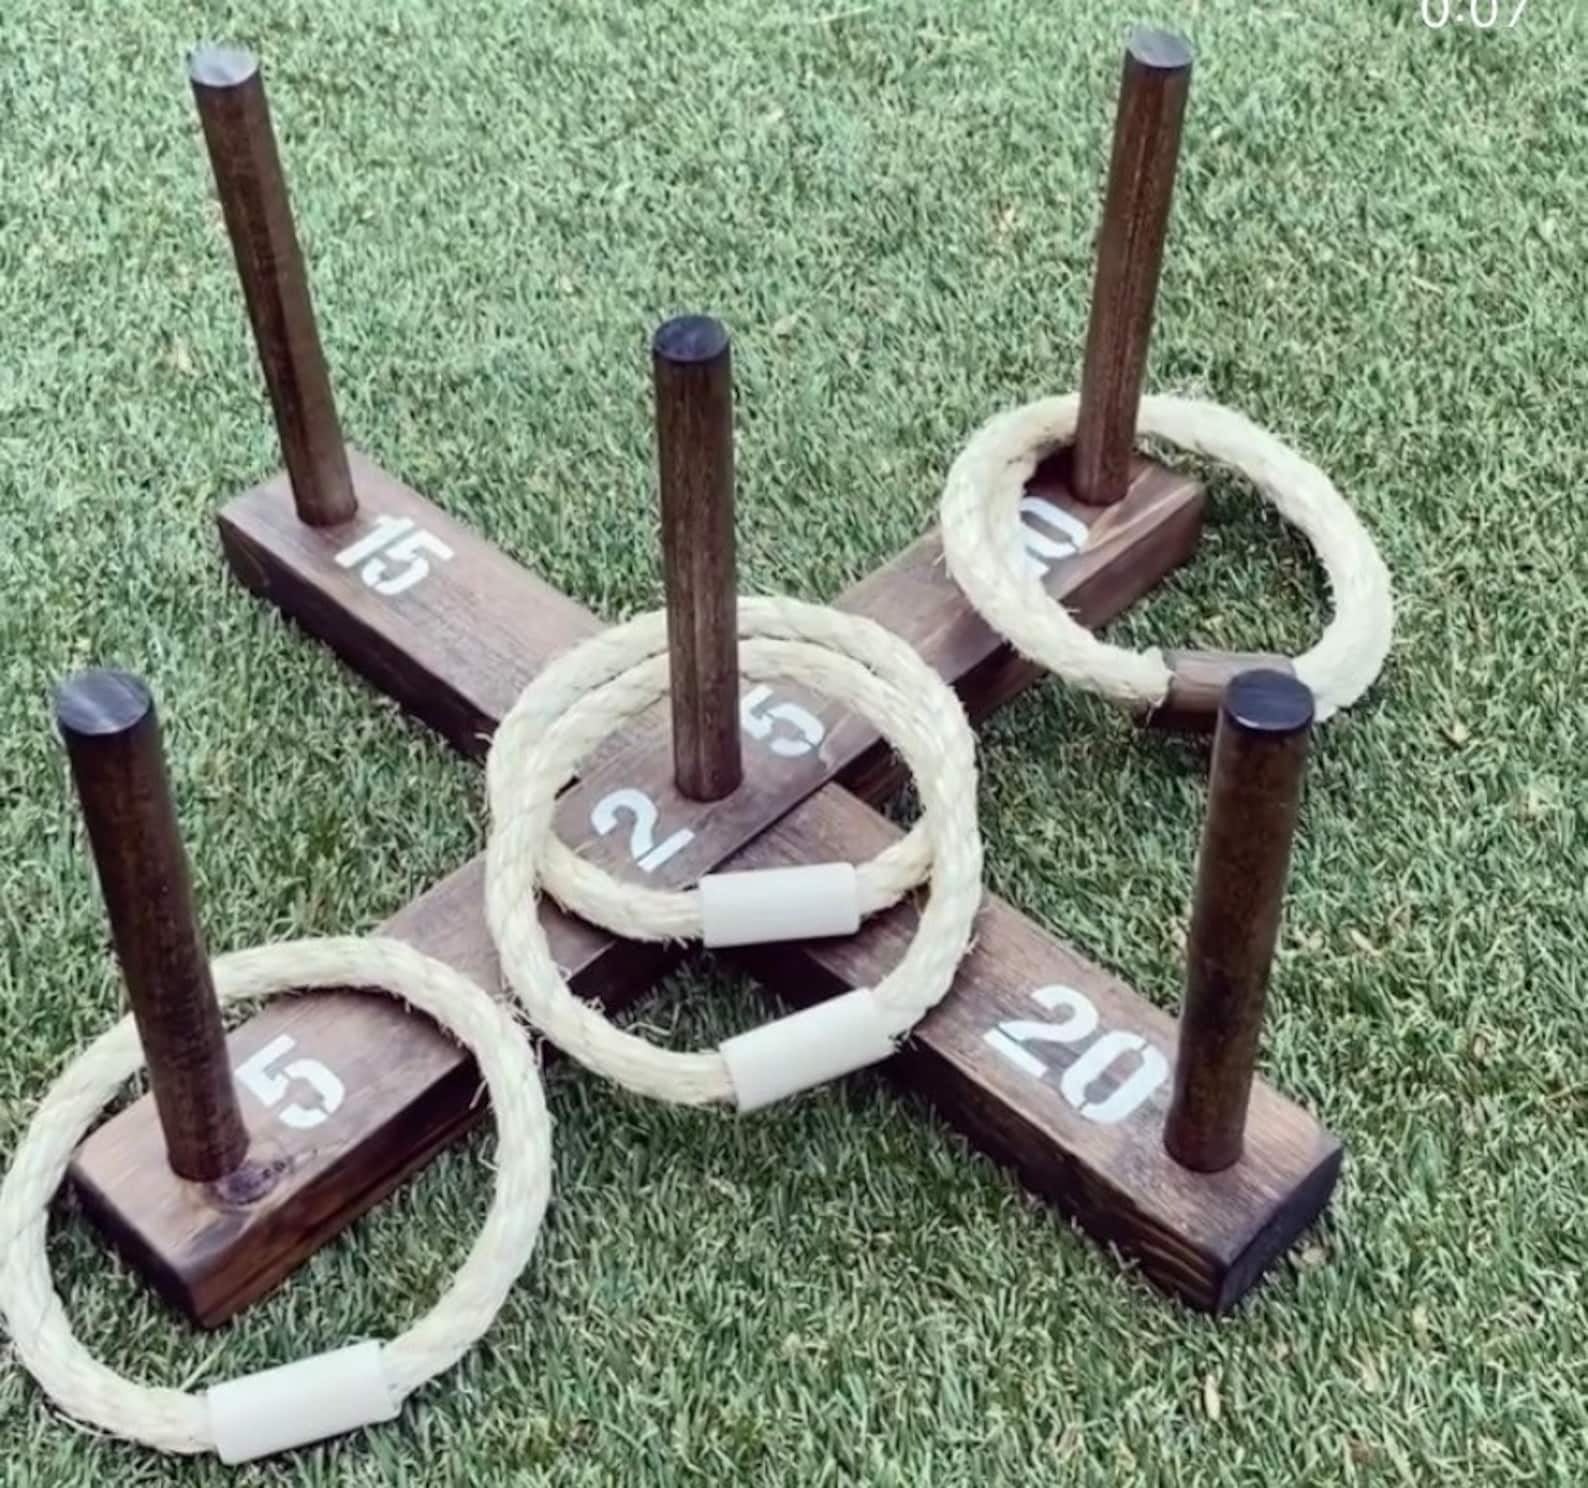 2 in 1 Horseshoe & Ring Toss Game Set Outdoor Game for Family - Horseshoe  Set Best Yard Party Lawn Beach Games Perfect for Adults, Kids